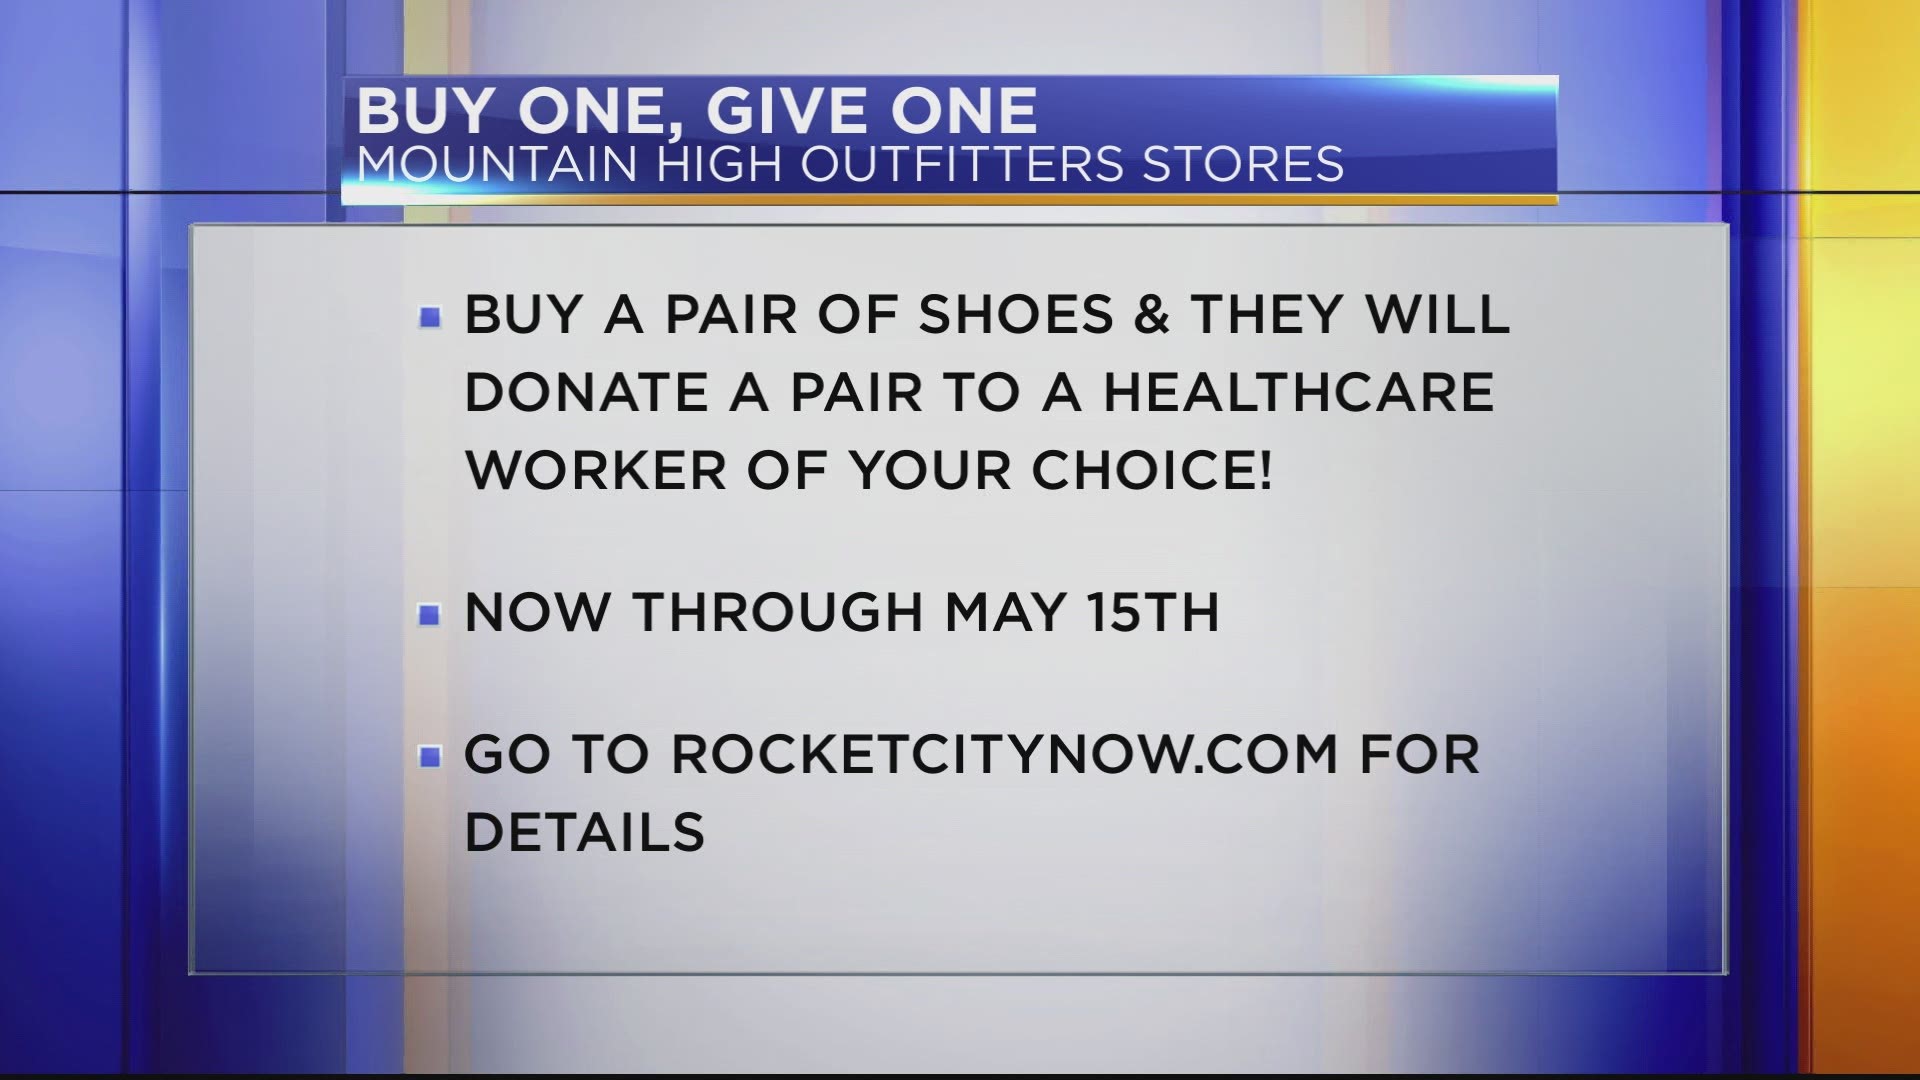 Now through May 15, any individual that buys a pair of shoes, MHO will give a pair to a first responder or healthcare worker of their choice.